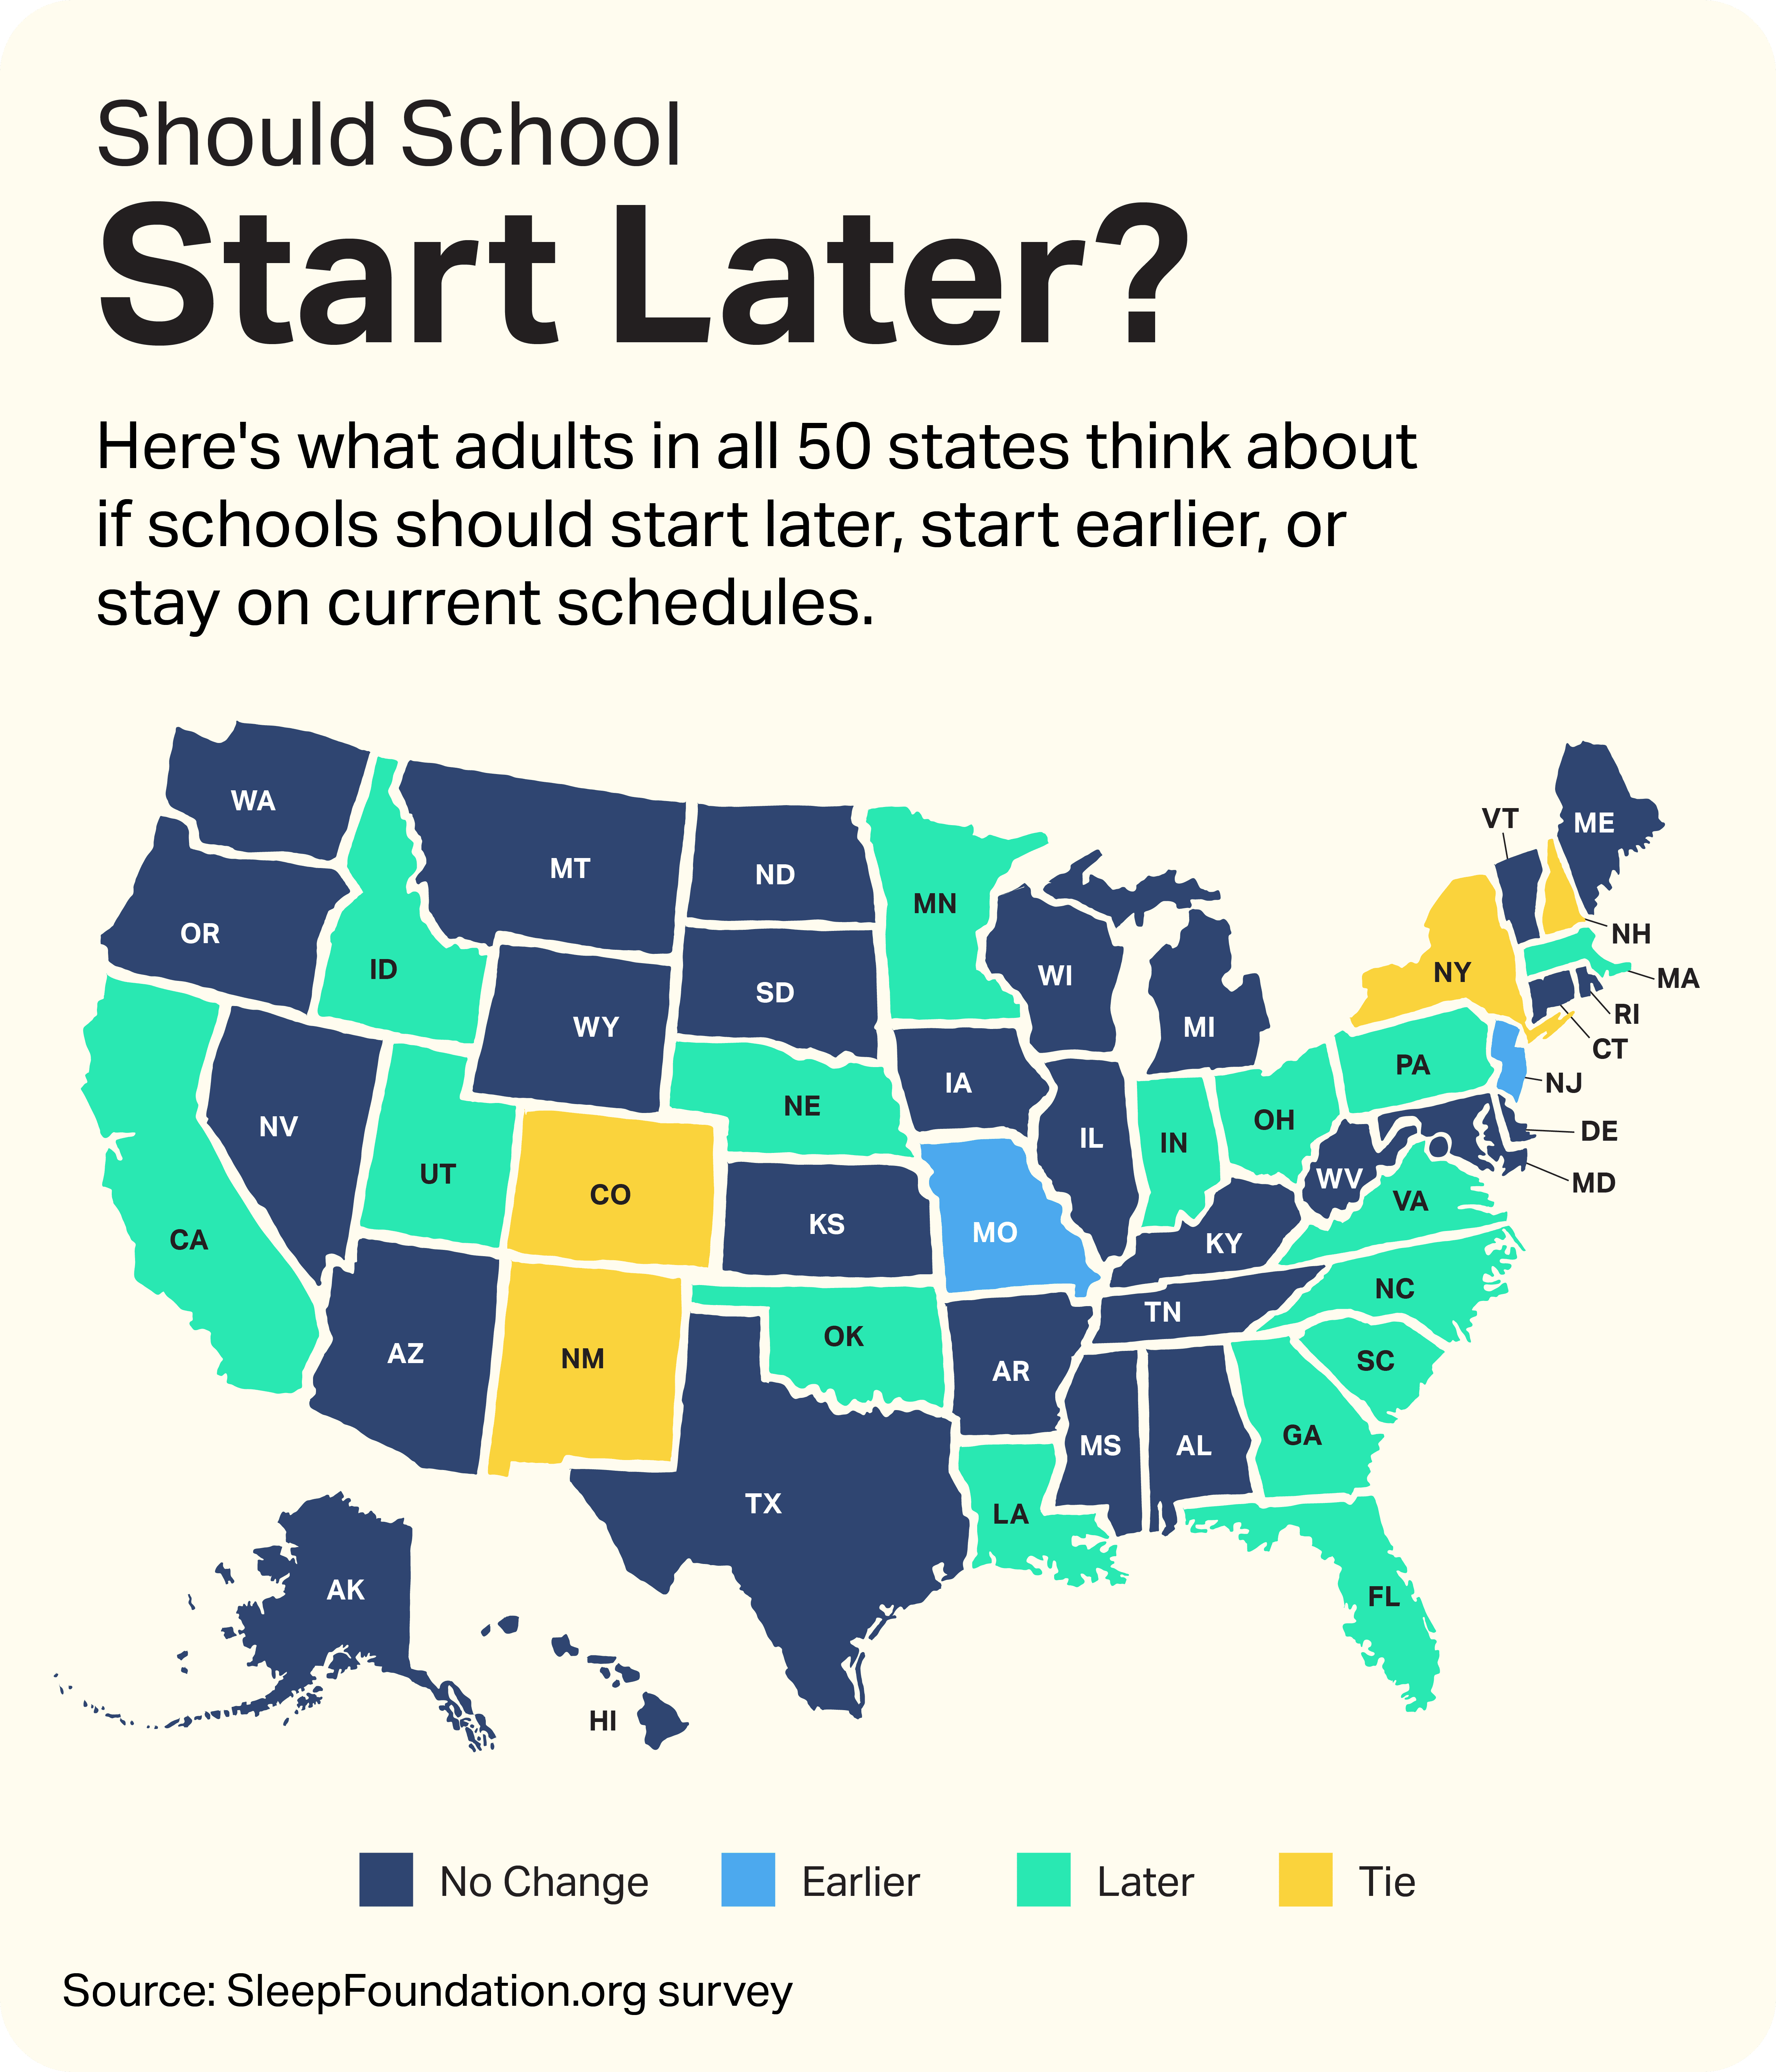 Should School Start Later? Here's What Surveyed Adults Say